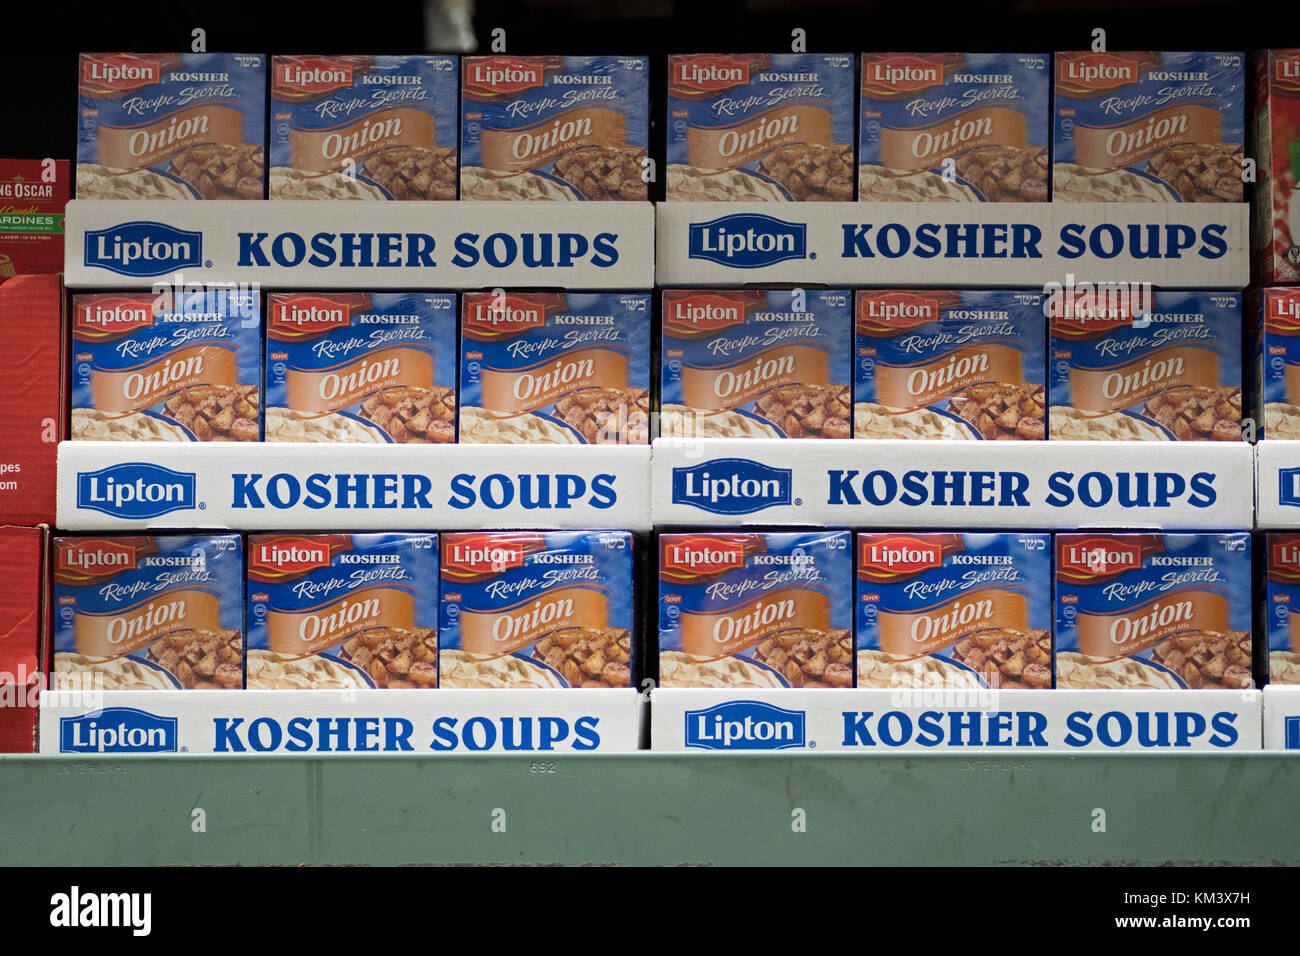 Lipton Kosher Soups for sale at BJ's Wholesale Club in Whitestone, Queens, New York. Stock Photo